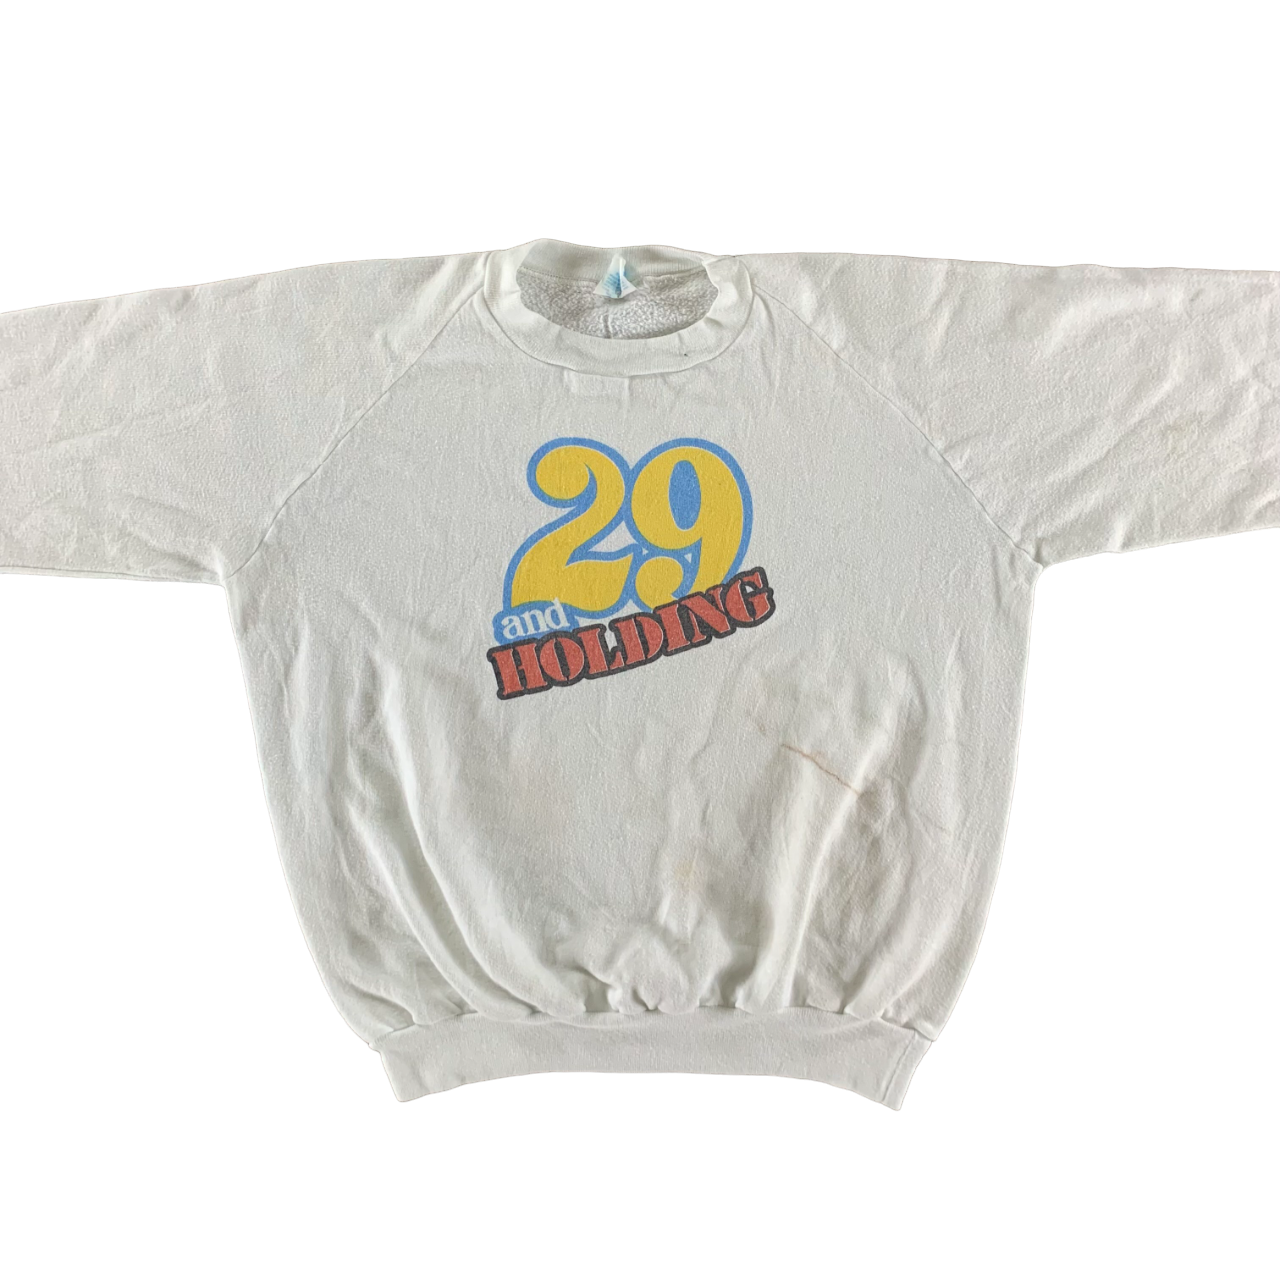 Vintage 1980s 29 and Holding Sweatshirt size XL